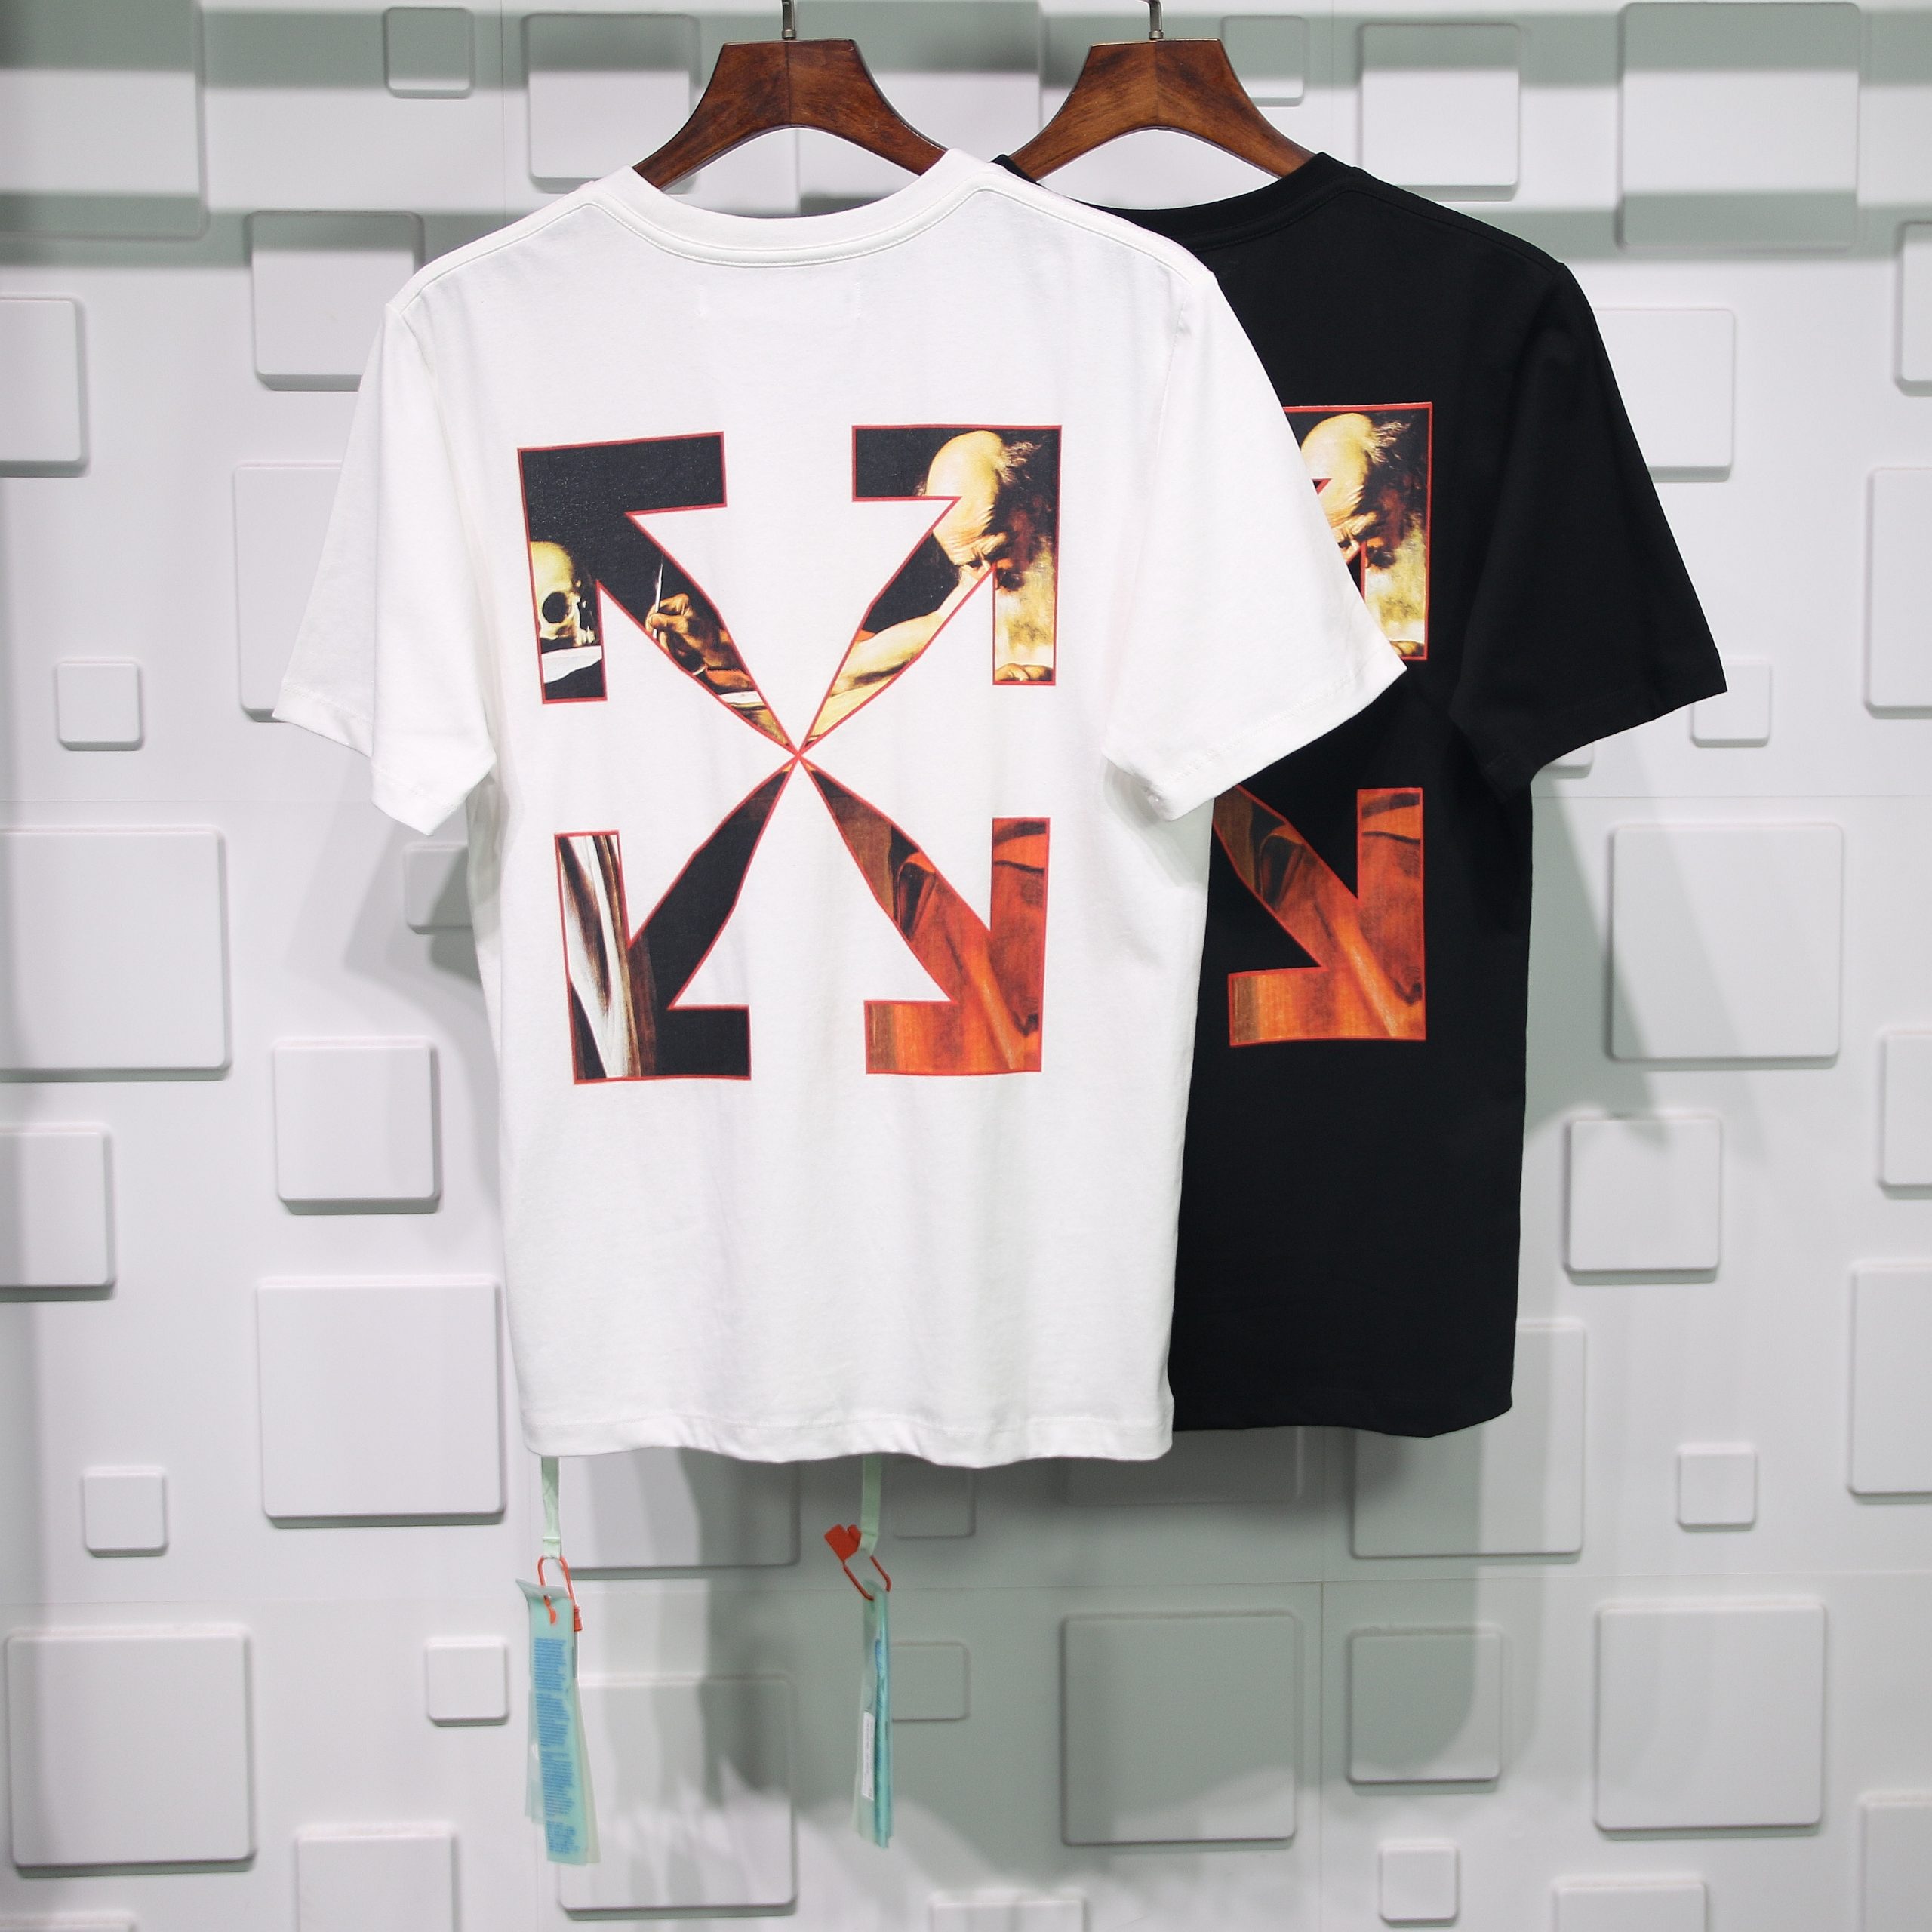 OFF-WHITE-CO-VIRGIL-ABLOH-COTTON-JERSEY-T-SHIRT-26-scaled-1.jpg